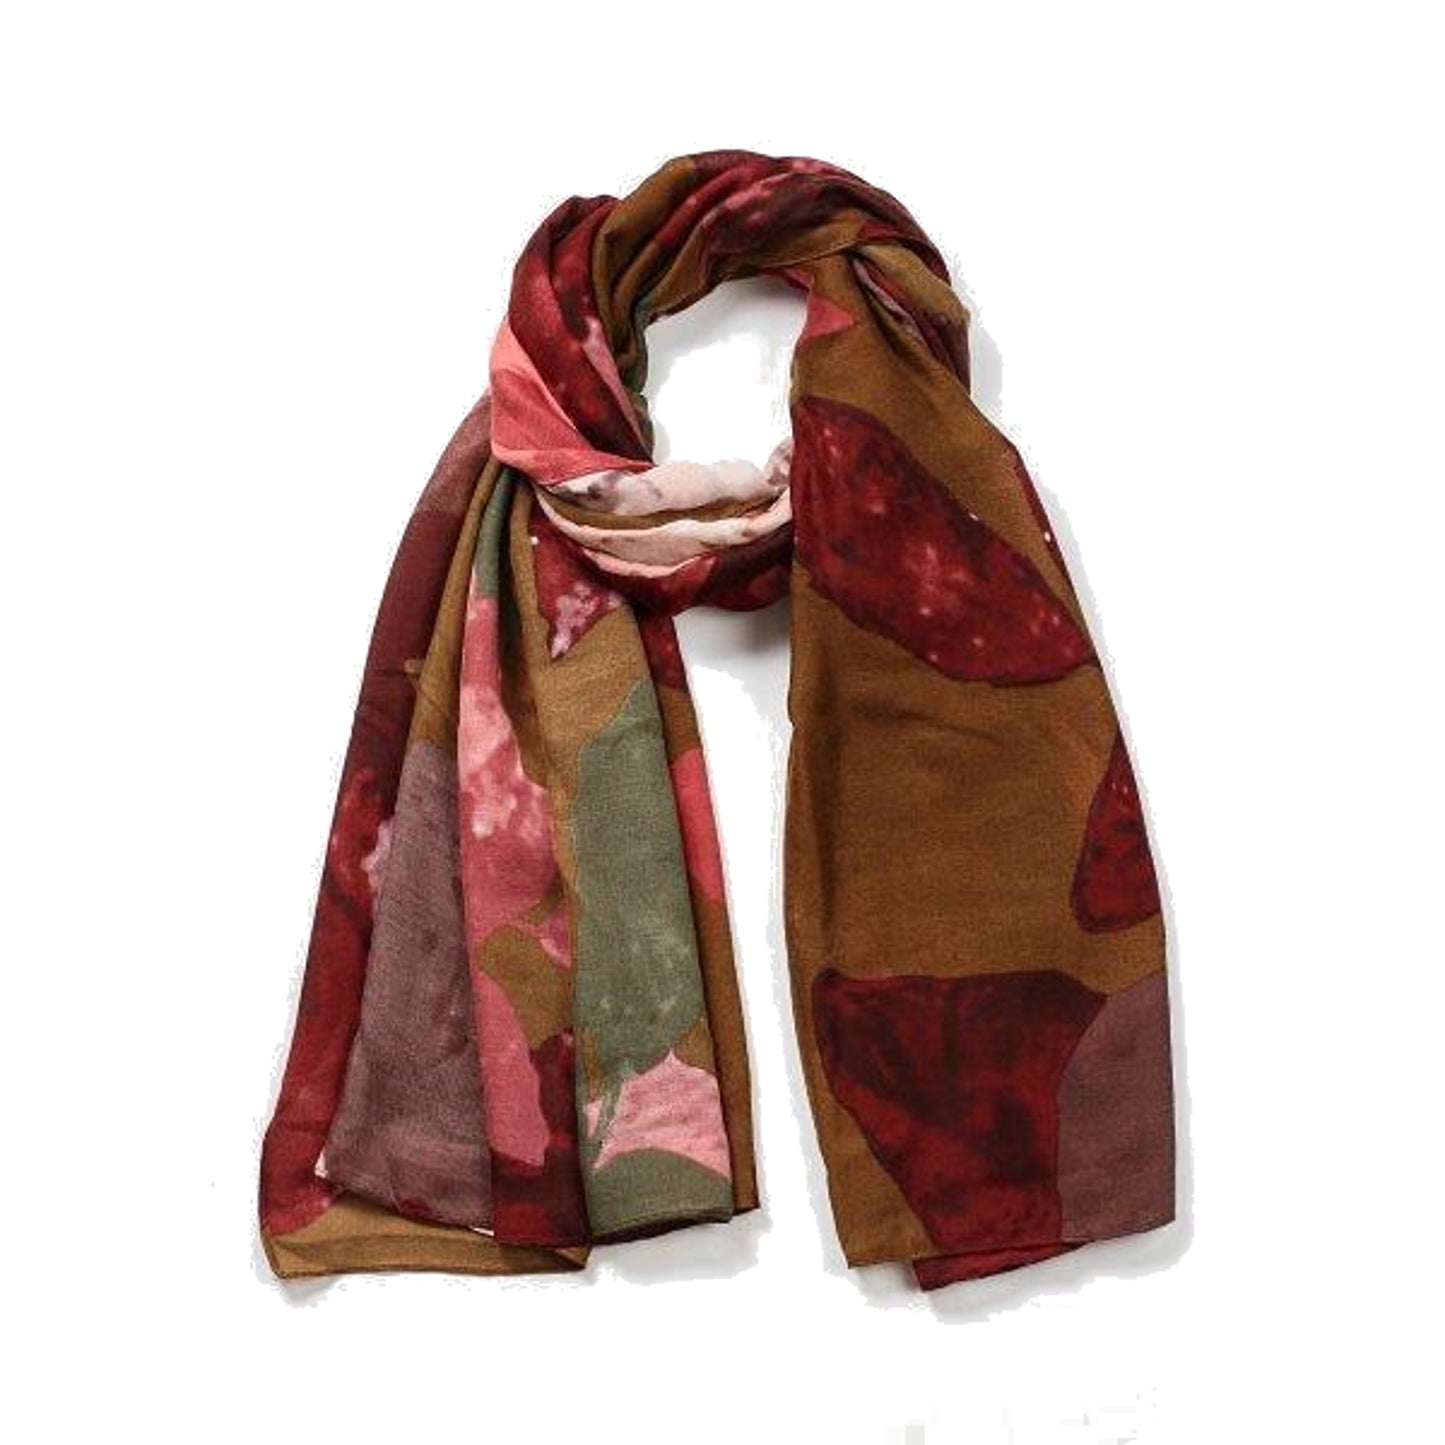 Beth Tan/Lush Flower Print Scarf Made From Recycled Bottles